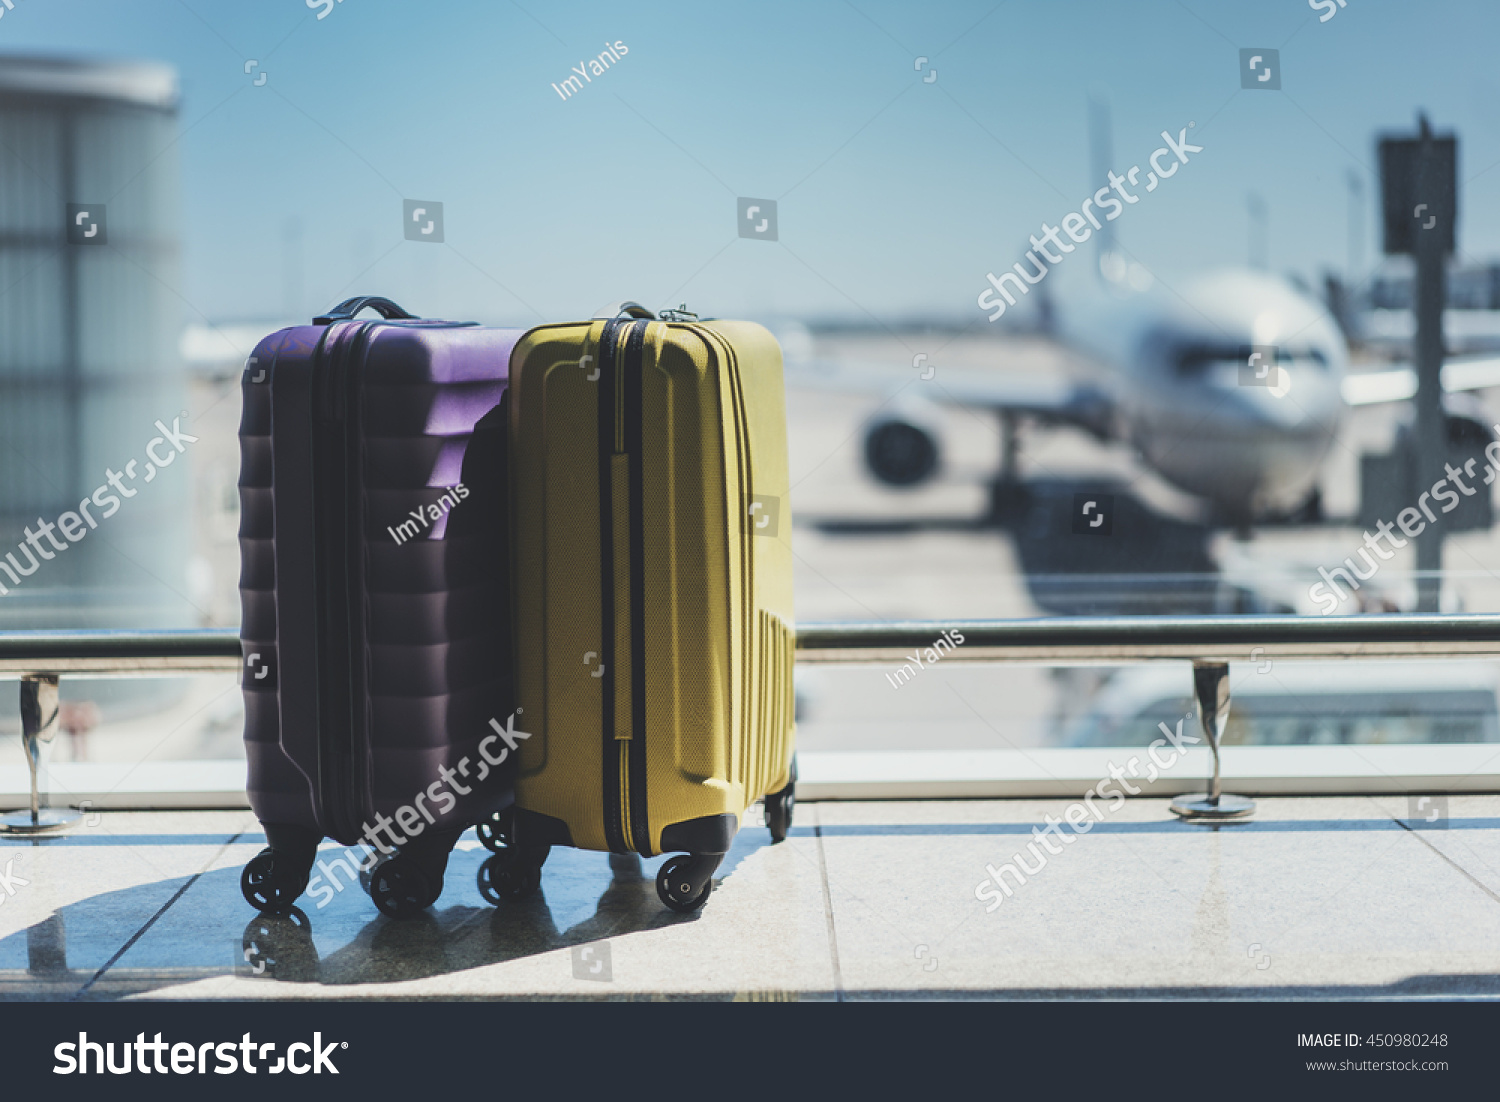 Suitcases in airport departure lounge, airplane in background, summer vacation concept, traveler suitcases in airport terminal waiting area, empty hall interior with large windows, focus on suitcases #450980248